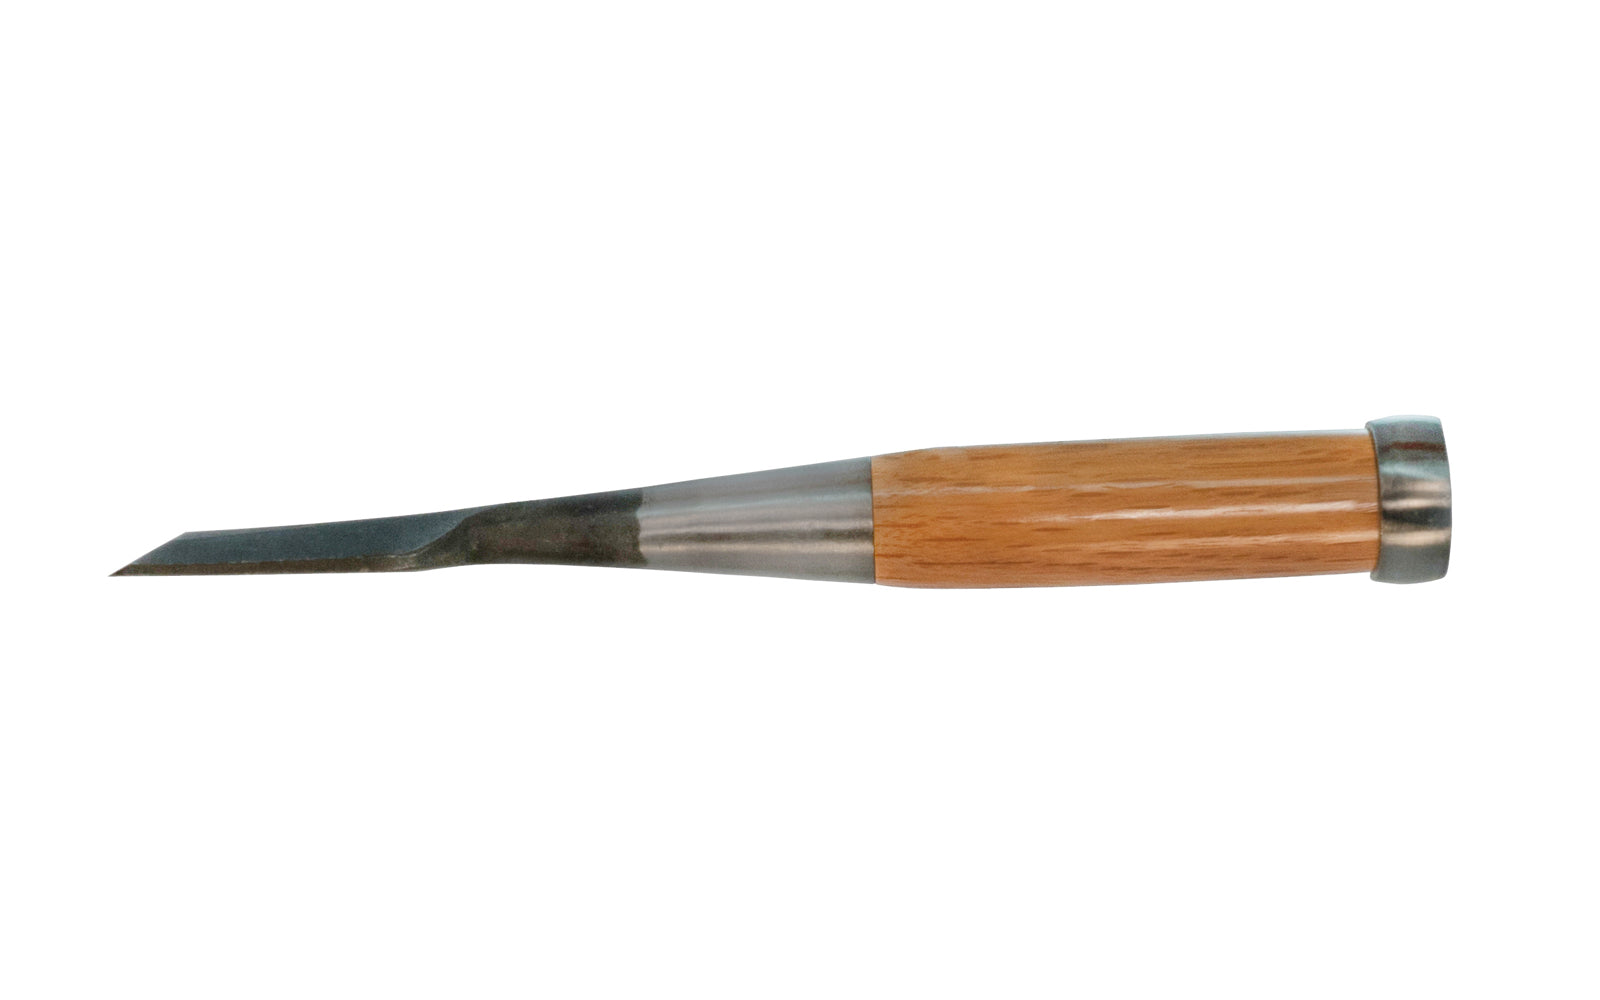 High quality Japanese Seigen Saku socket chisel 42 mm (1-5/8") with high-grade Japanese laminated steel. The whole chisel itself has a well-balanced feel when in your hand with it's long blade, making it ideal for woodworkers. The beveled edges help the chisel work with accuracy in tight spots. Made in Japan.